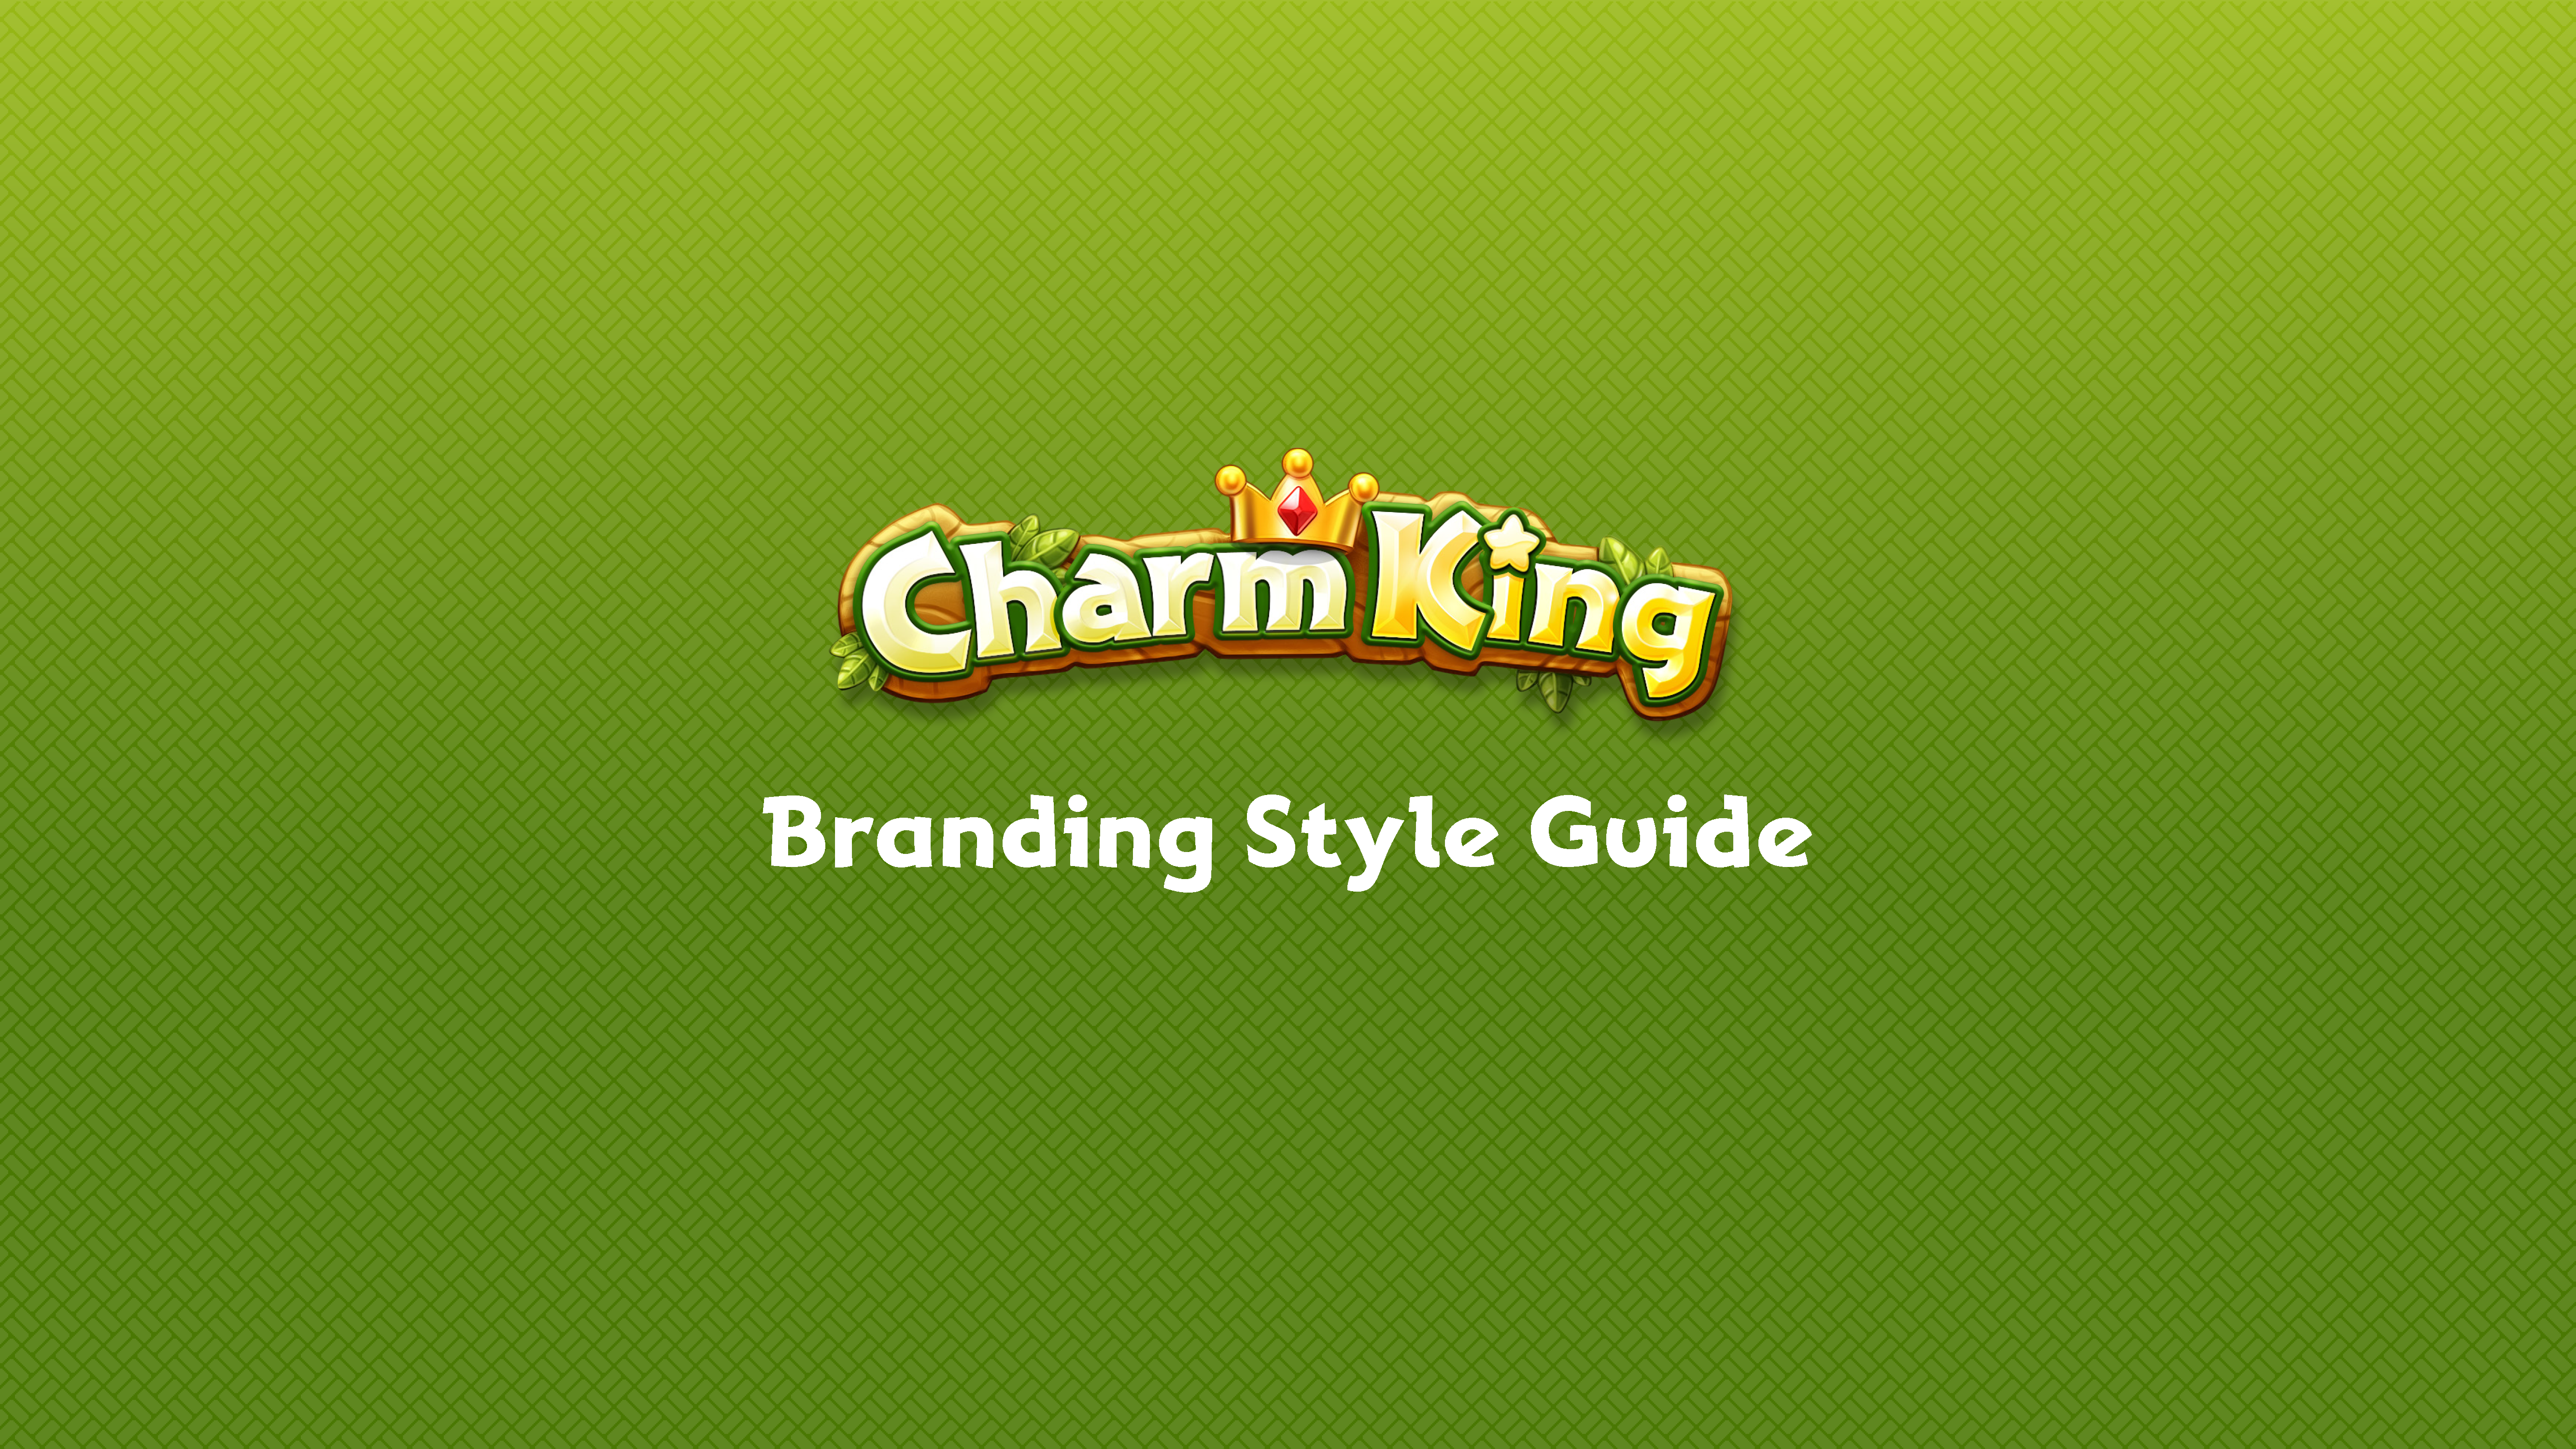 Style and Branding Guidelines